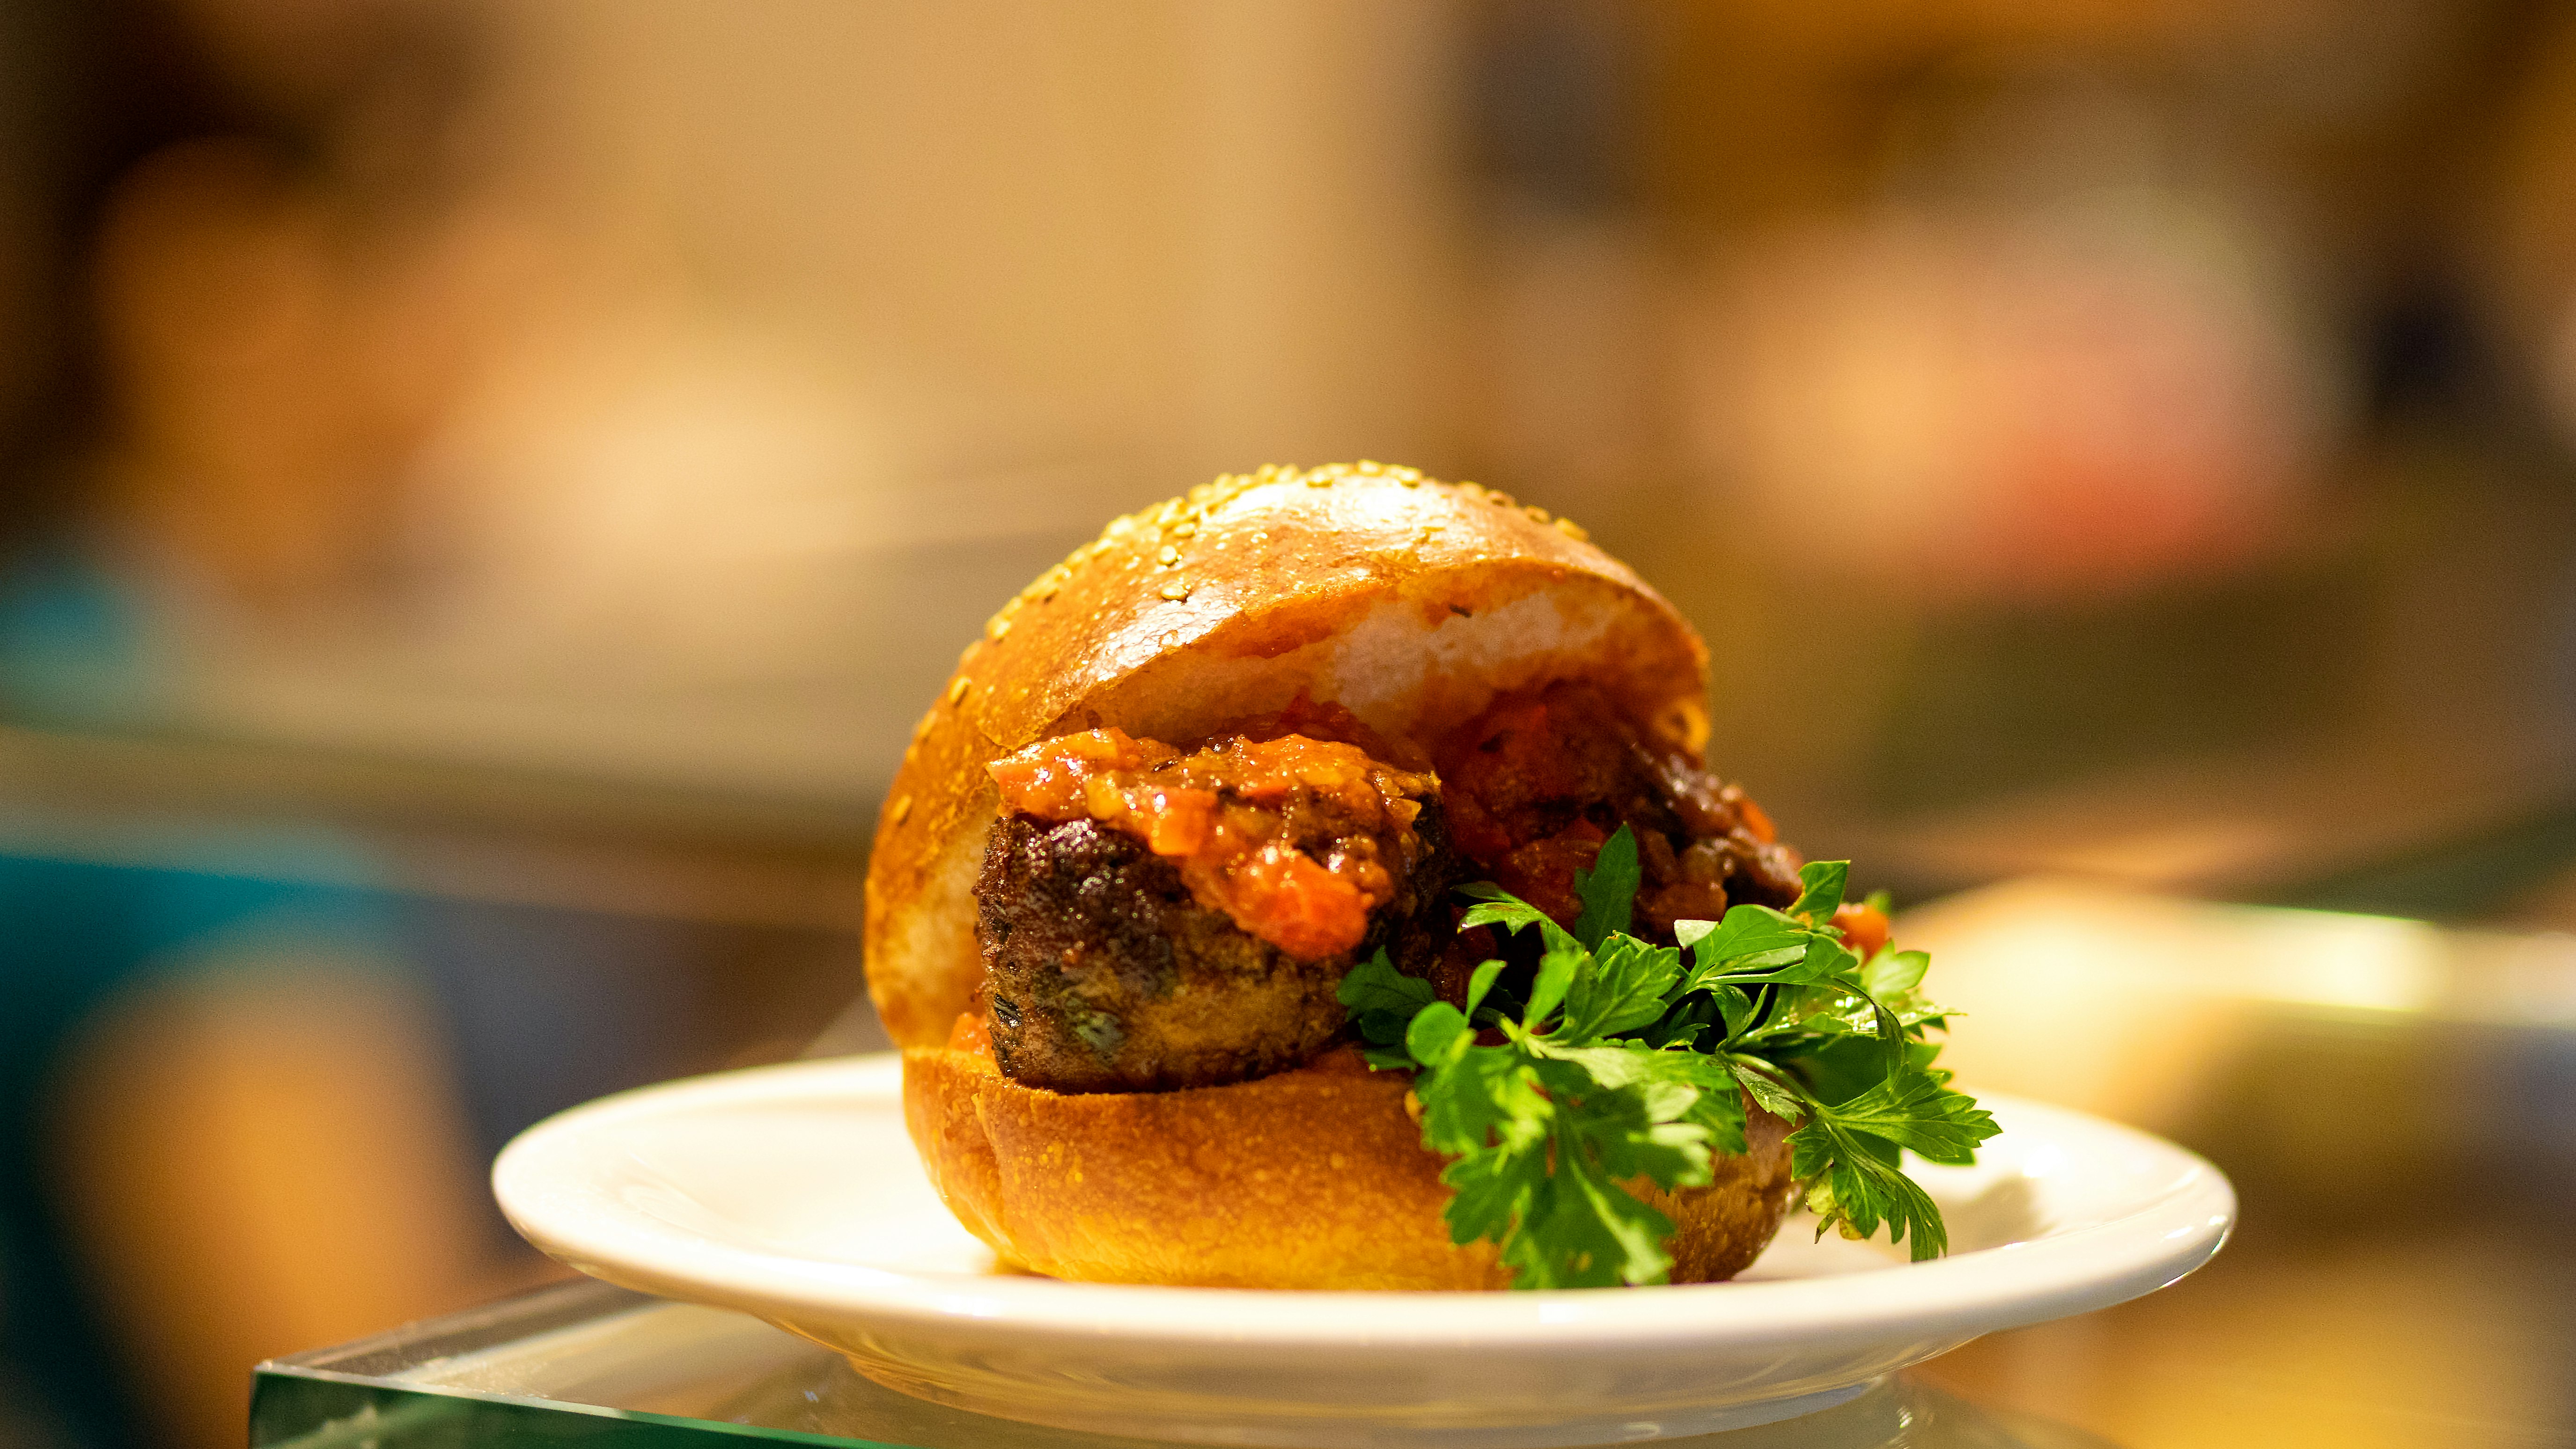 Beef meat burger with tomato sauce